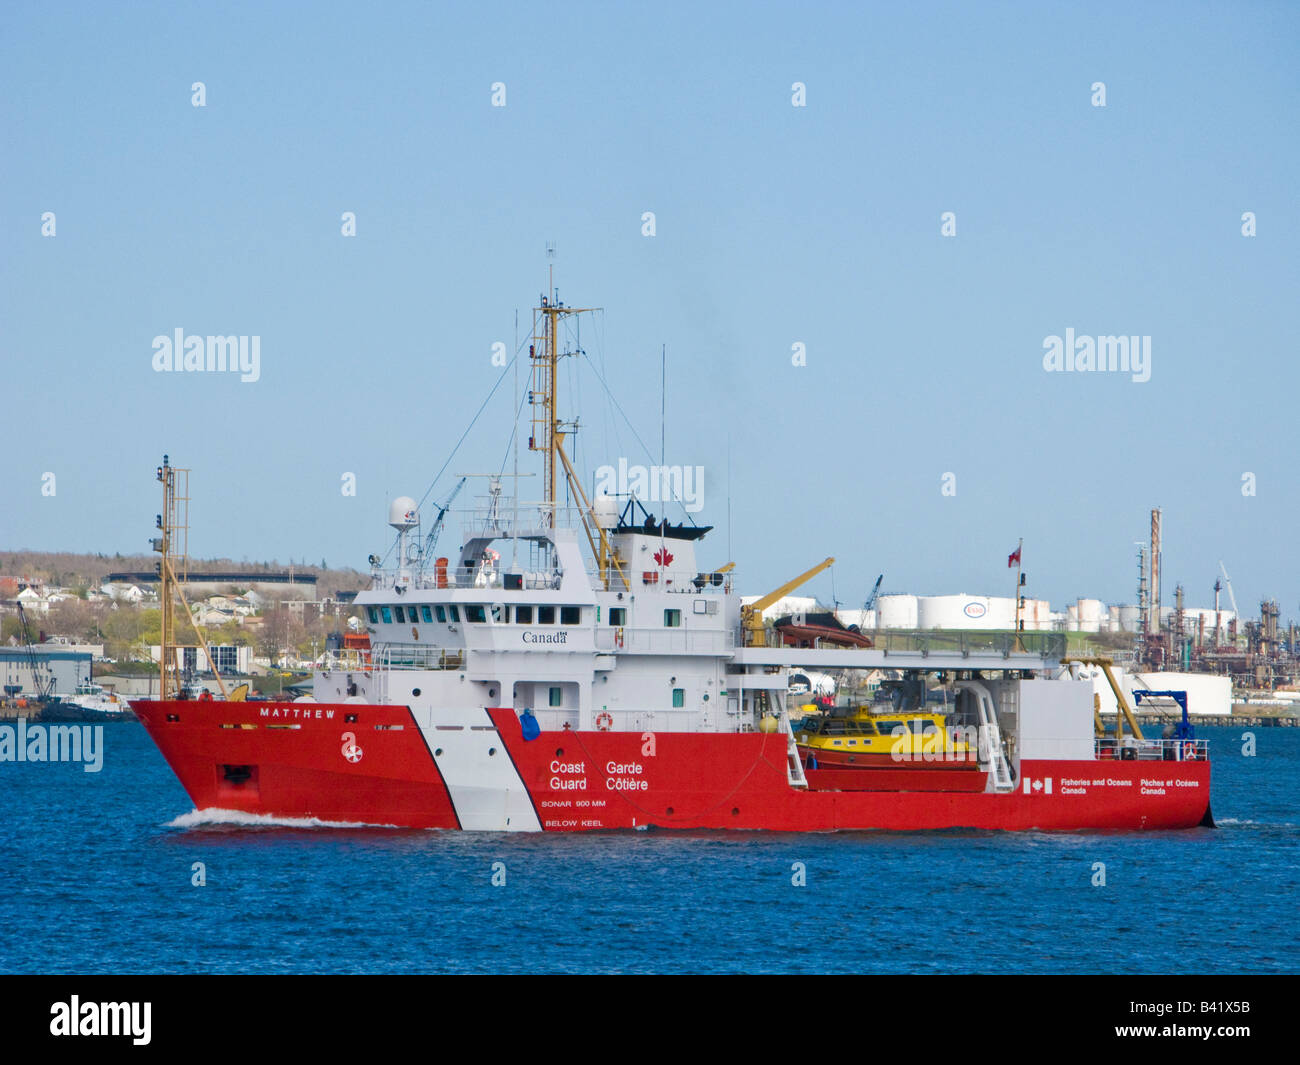 CCGS Matthew is a hydrographic survey ship with the Canadian Coast Guard. Stock Photo